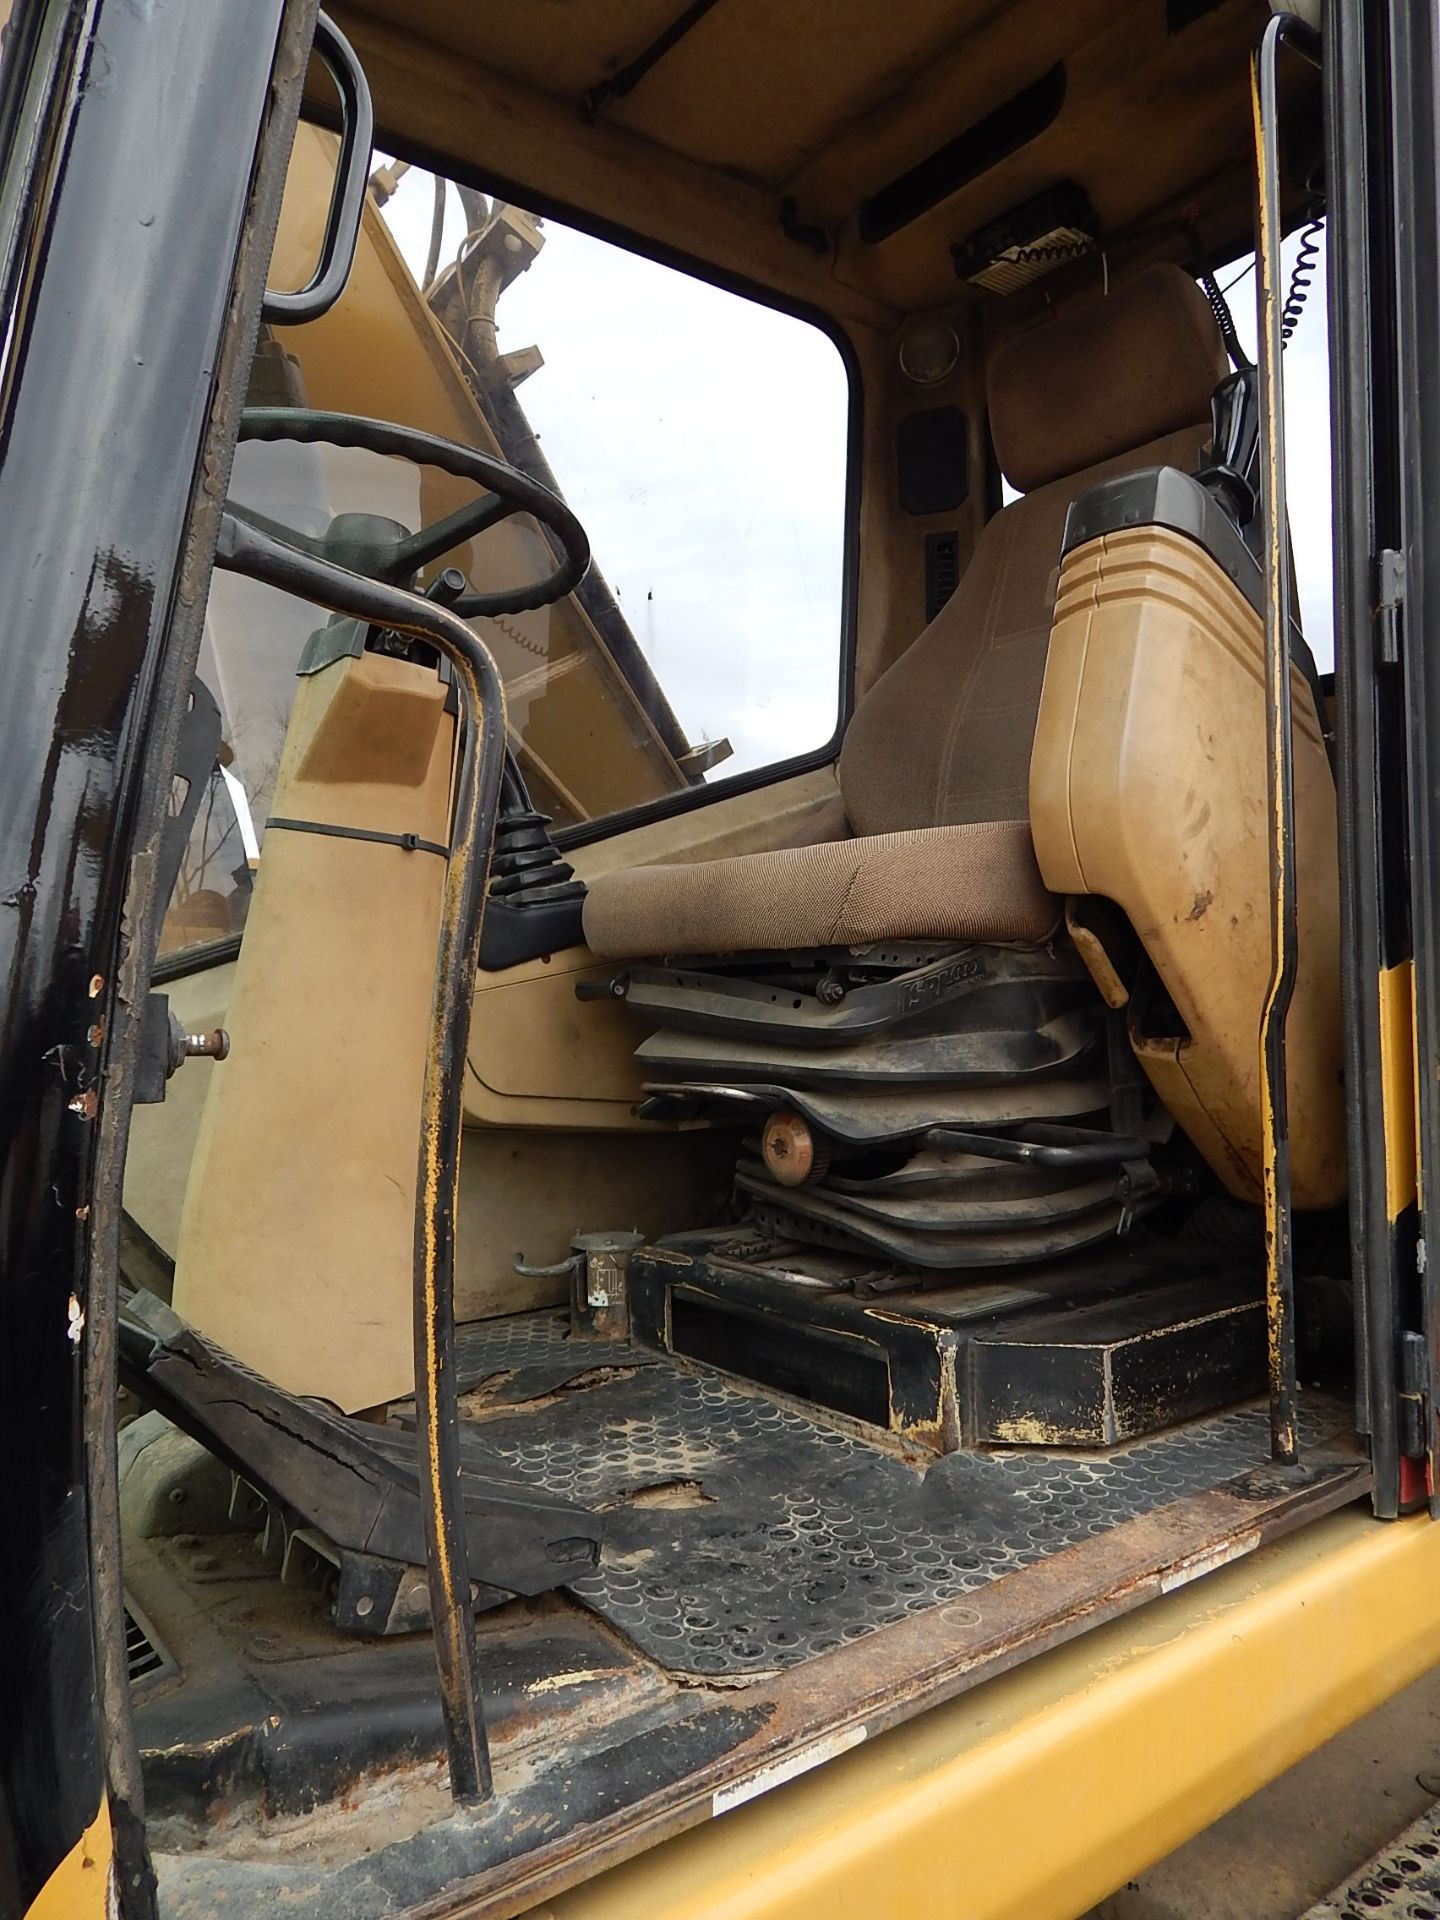 2000 Caterpillar Model M320 Mobile Excavator SN 06WL00522, (4) Outriggers, Dual Tires, Enclosed Cab, - Image 19 of 25